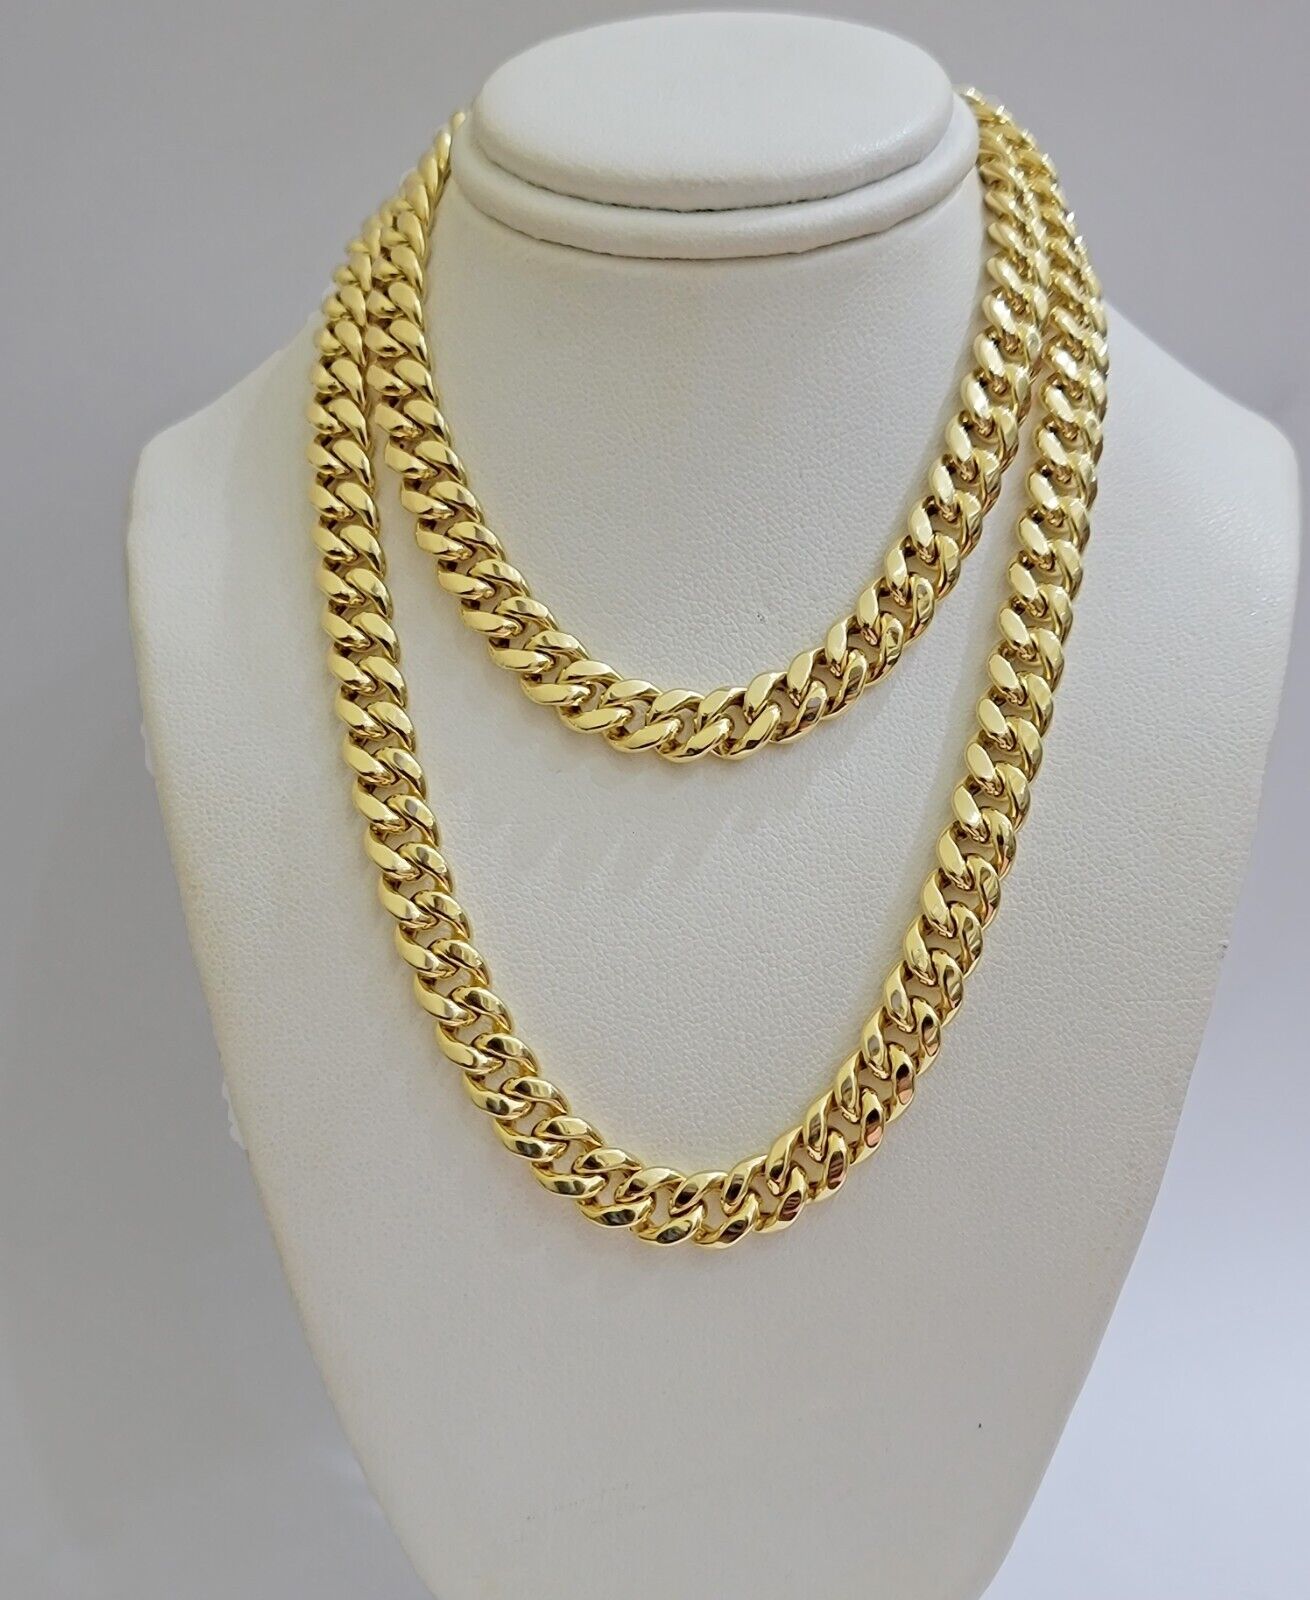 Miami Cuban Link Chain 18 Inch Necklace REAL 10k Yellow Gold 8mm Mens Women 10KT